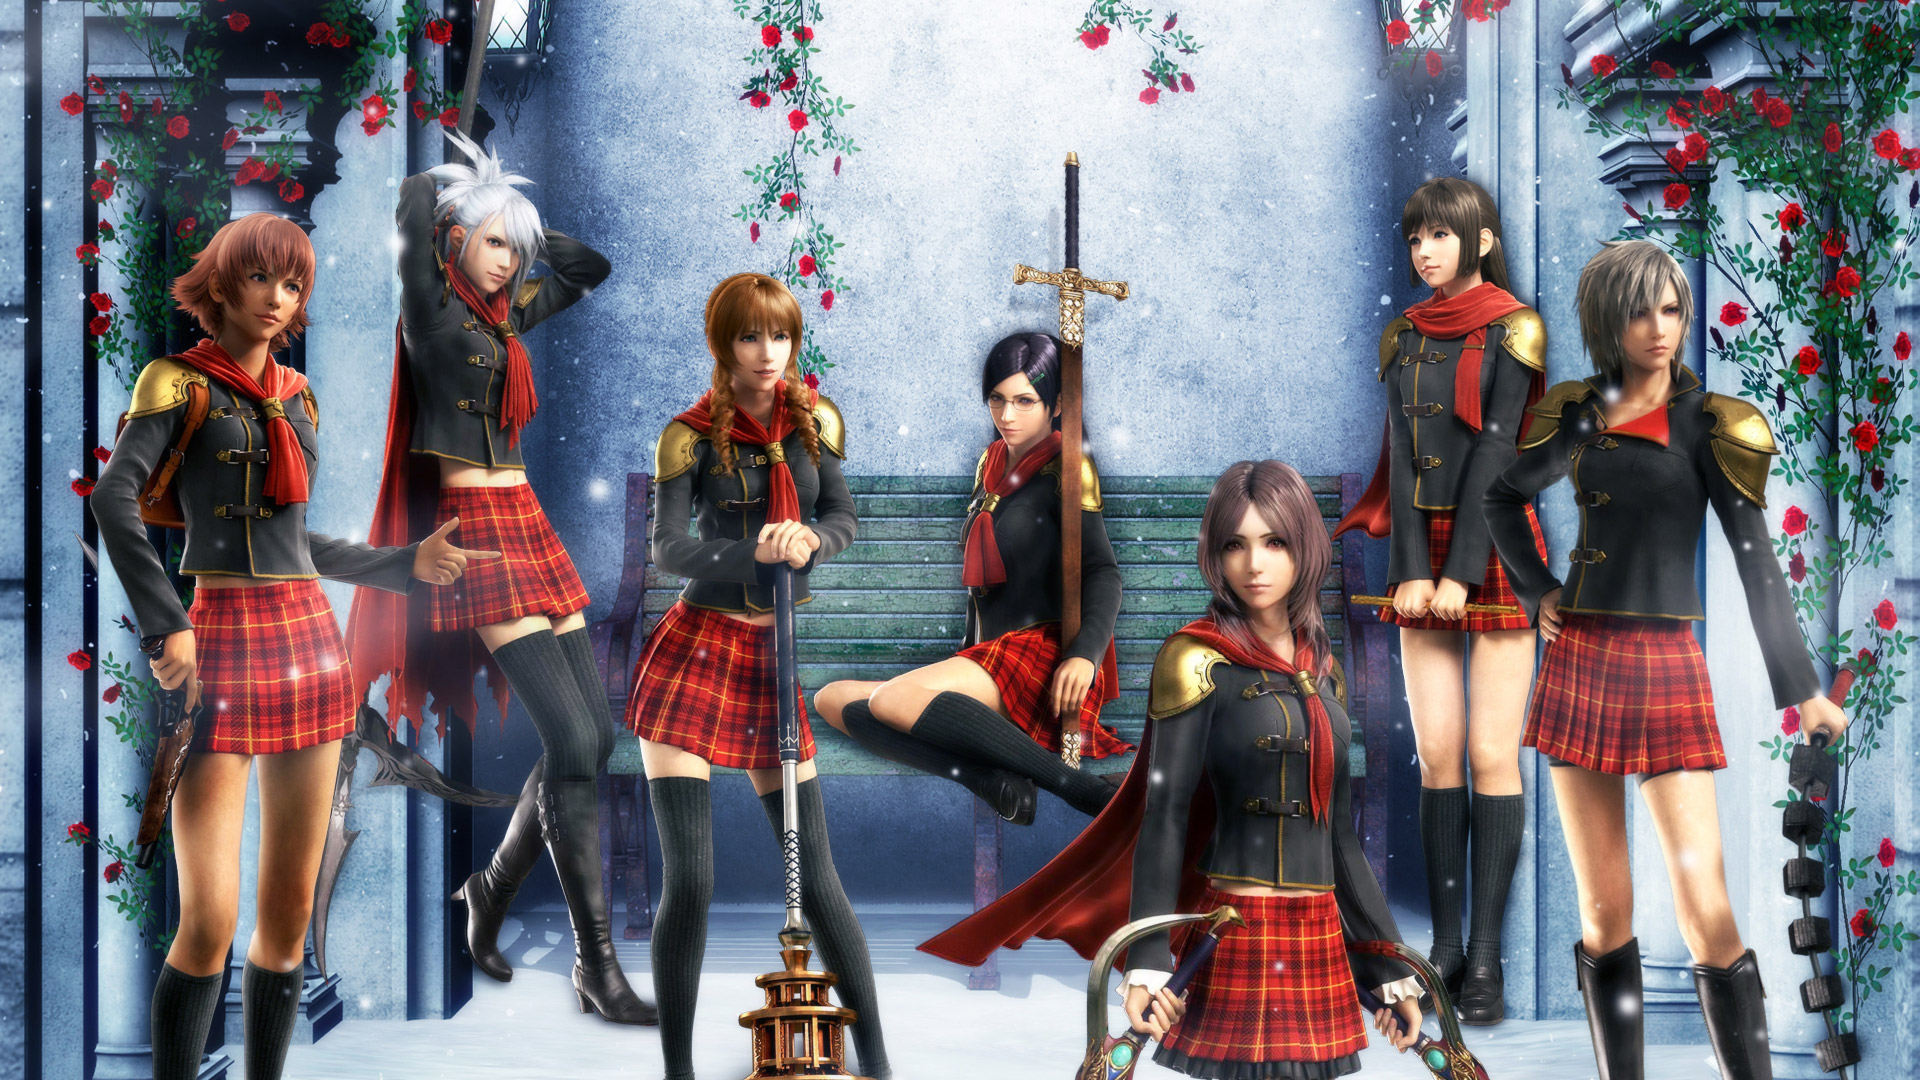 download final fantasy type 0 hd for free